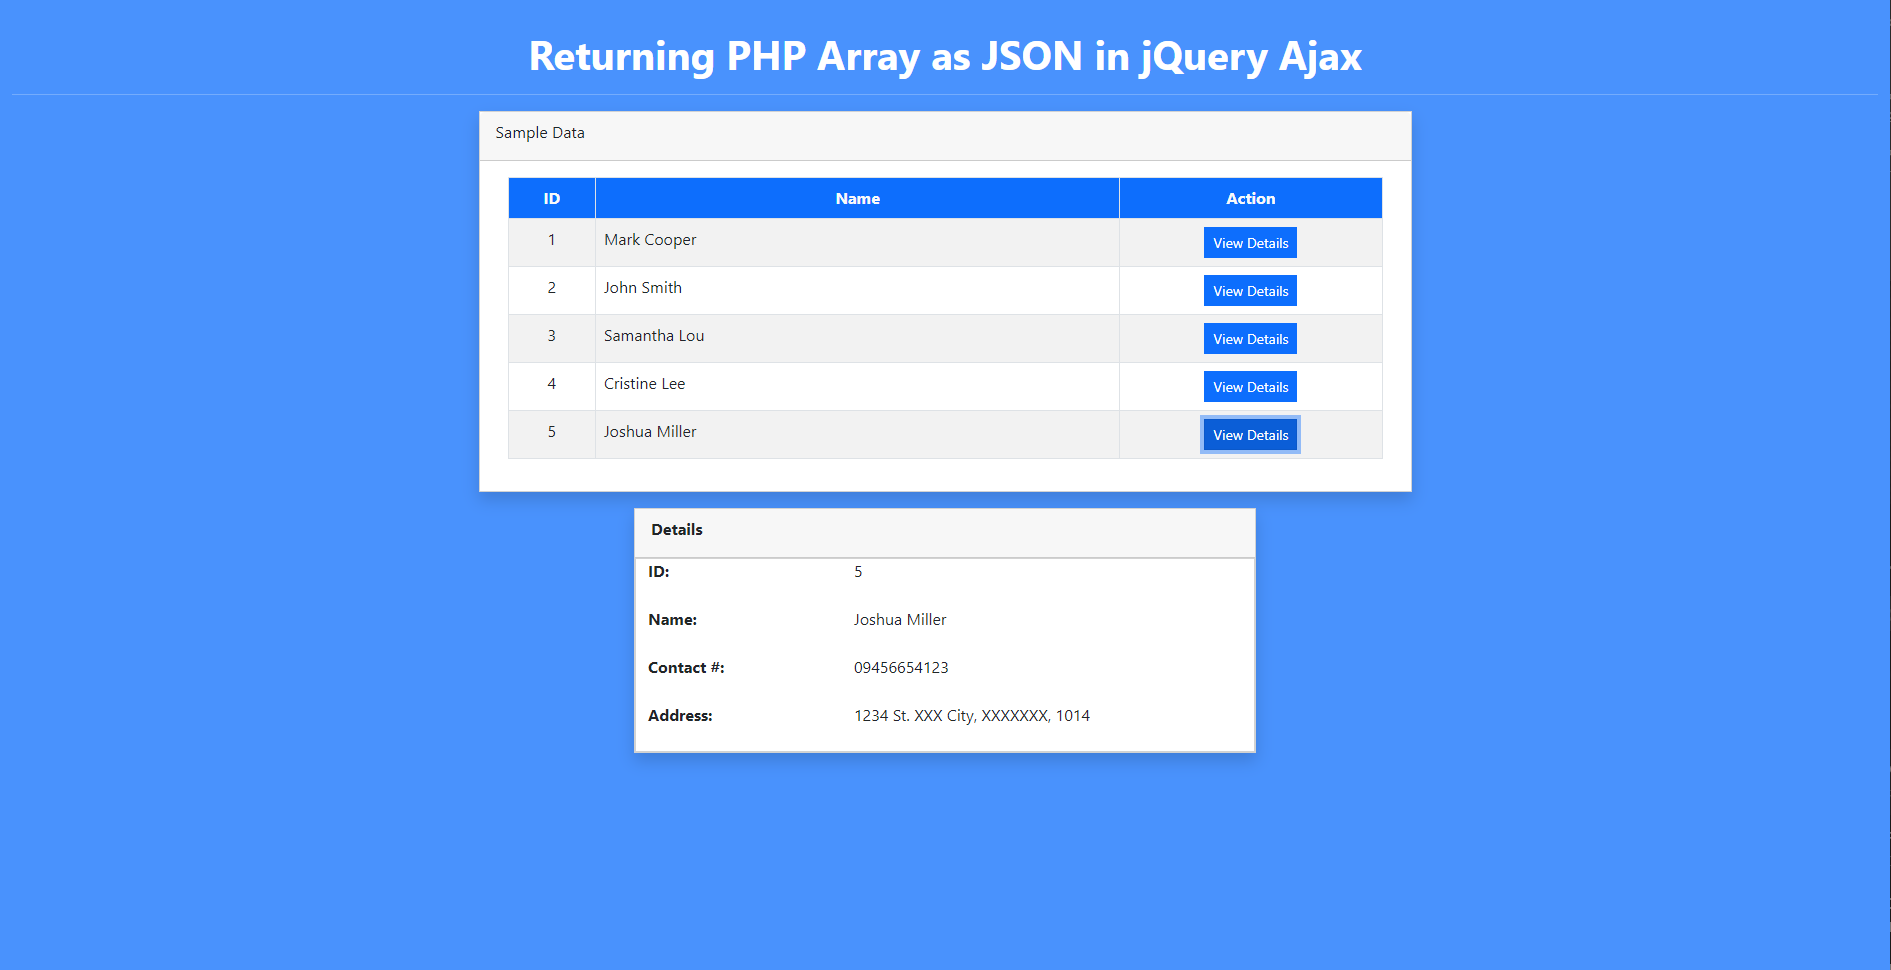 Returning PHP Array as JSON in Ajax Request